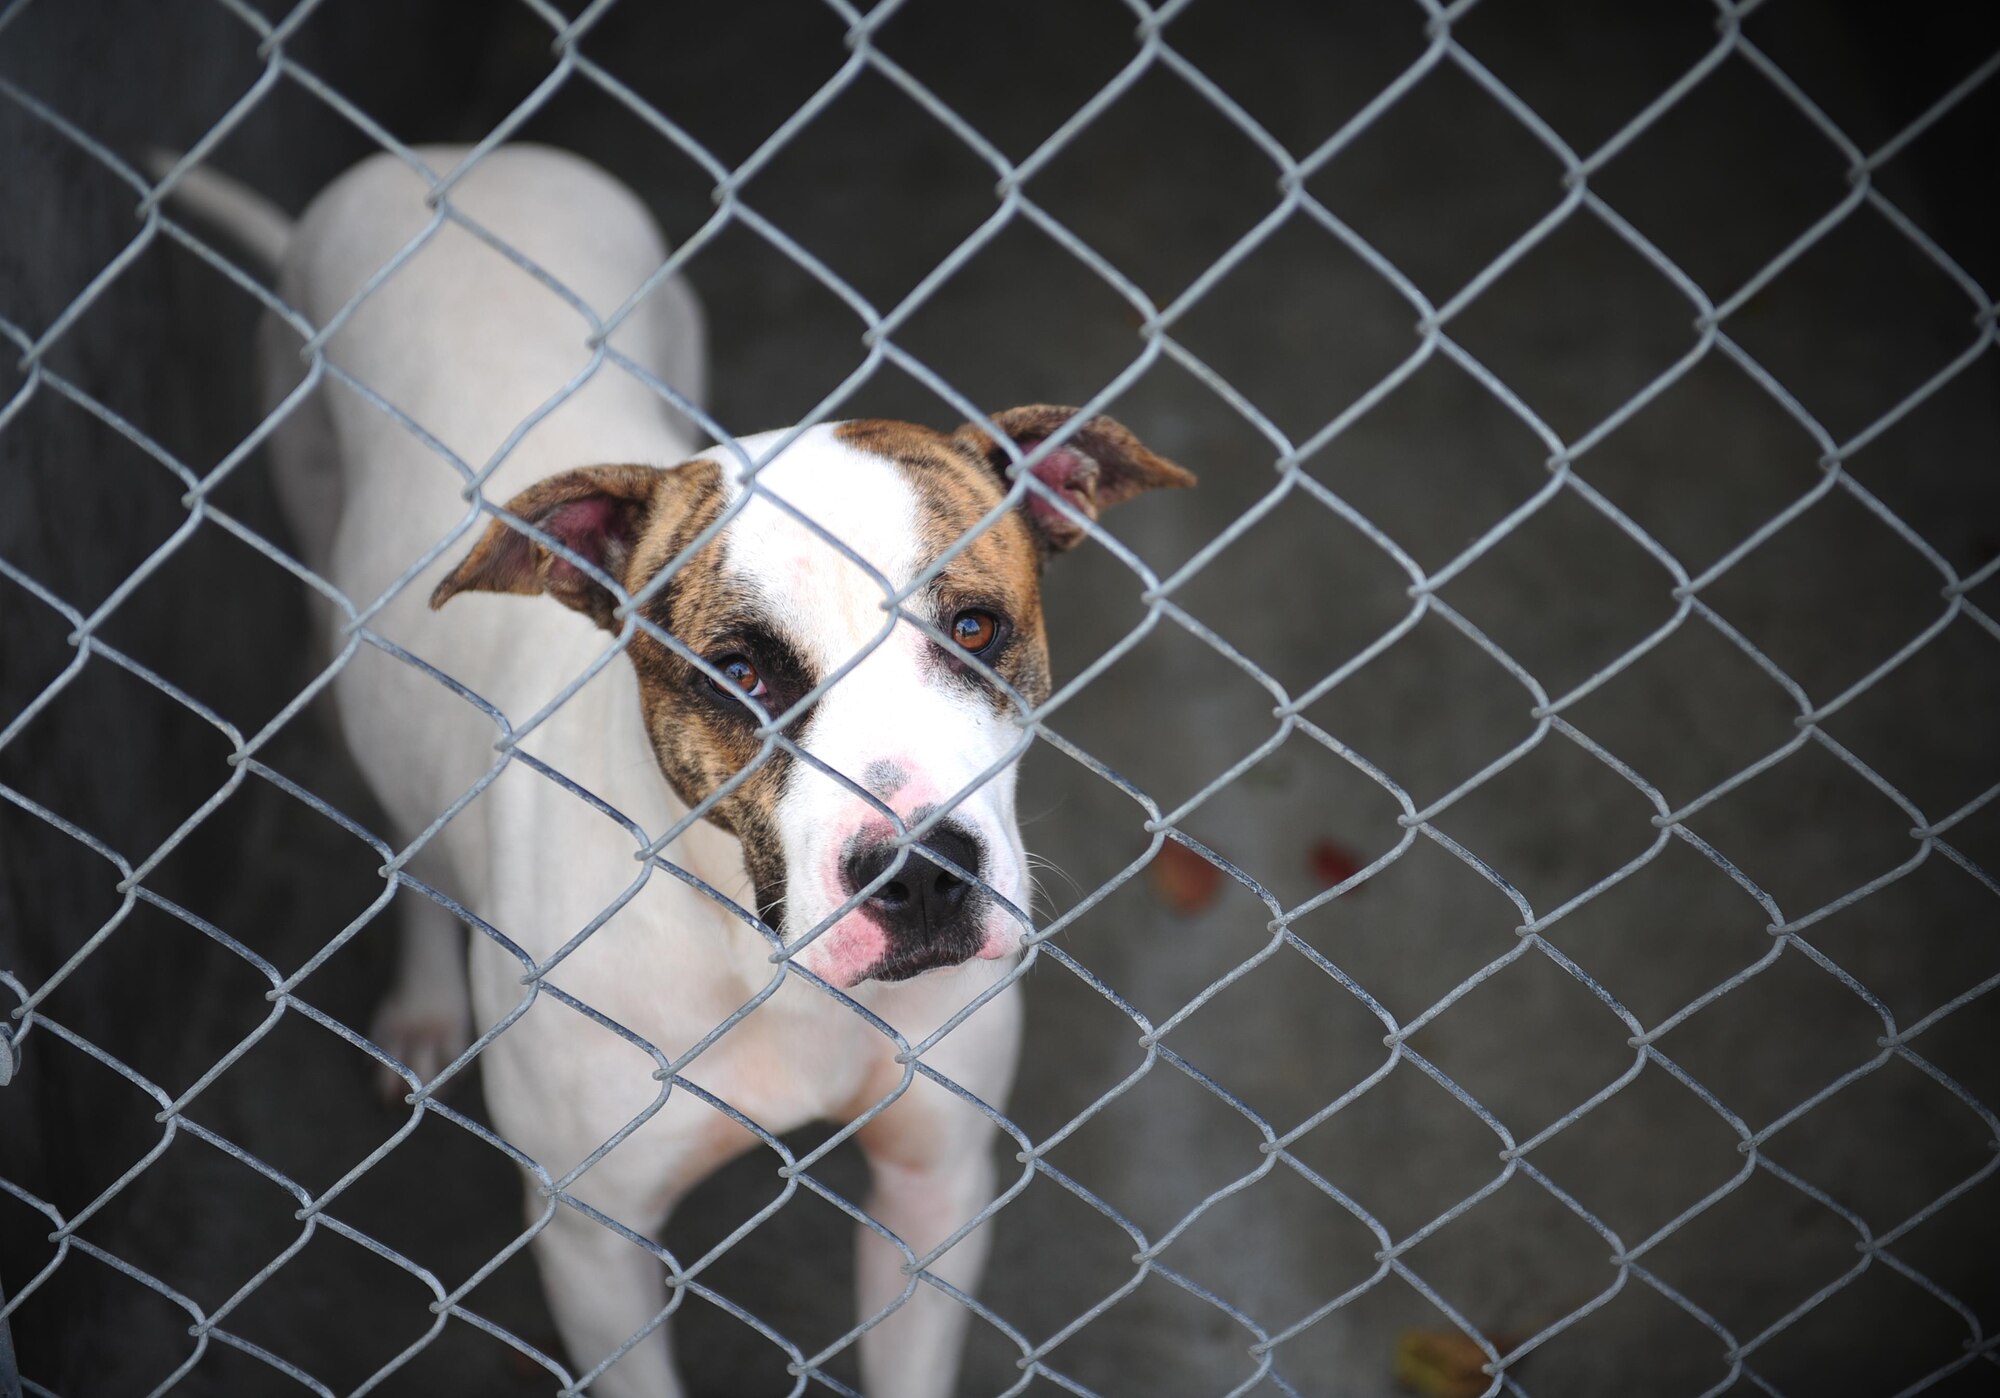 One of the many dogs previously available at a local animal shelter peers through the fencing in Warrensburg, Mo. Volunteer opportunities at a shelter include socialization and exercise of the animals.